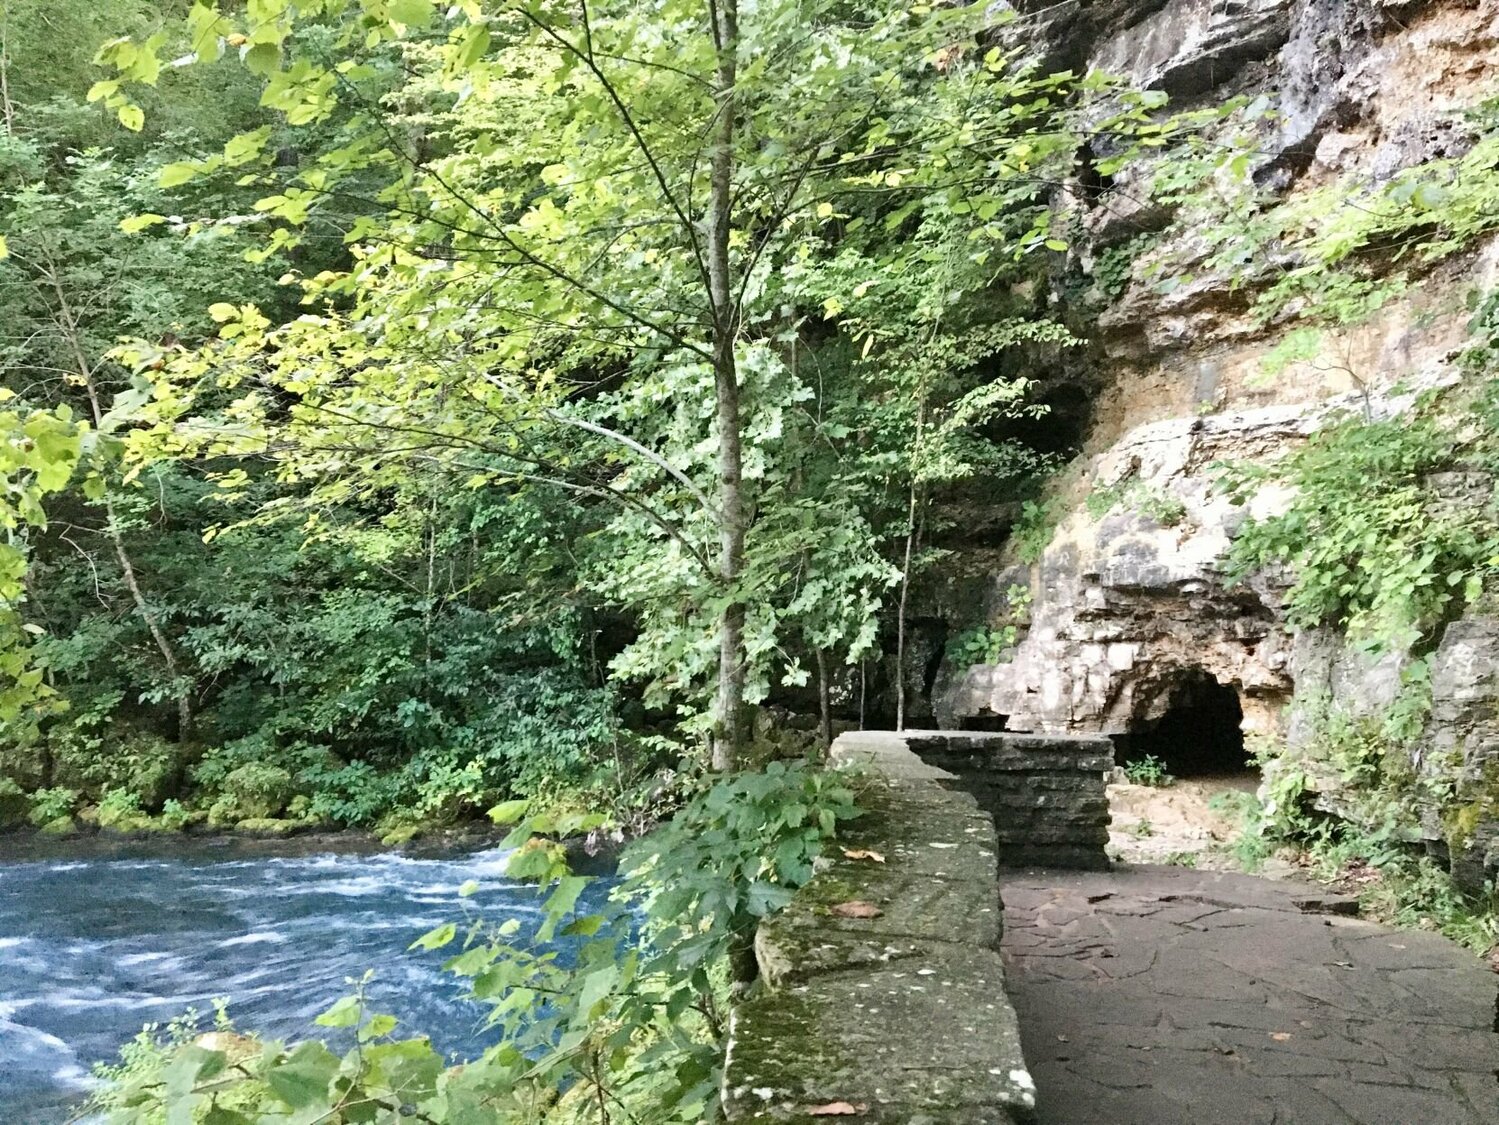 Big Spring in Carter County falls within Ozark National Scenic Riverways (ONSR), managed by the National Park Service, which recently released its findings of the economic impact of ONSR to the area during 2022. The report shows that In 2022, ONSR visits generated about $63.8 million in revenue to communities near the park, supporting 873 jobs and contributing a cumulative benefit to the local economy of $73.3 million.